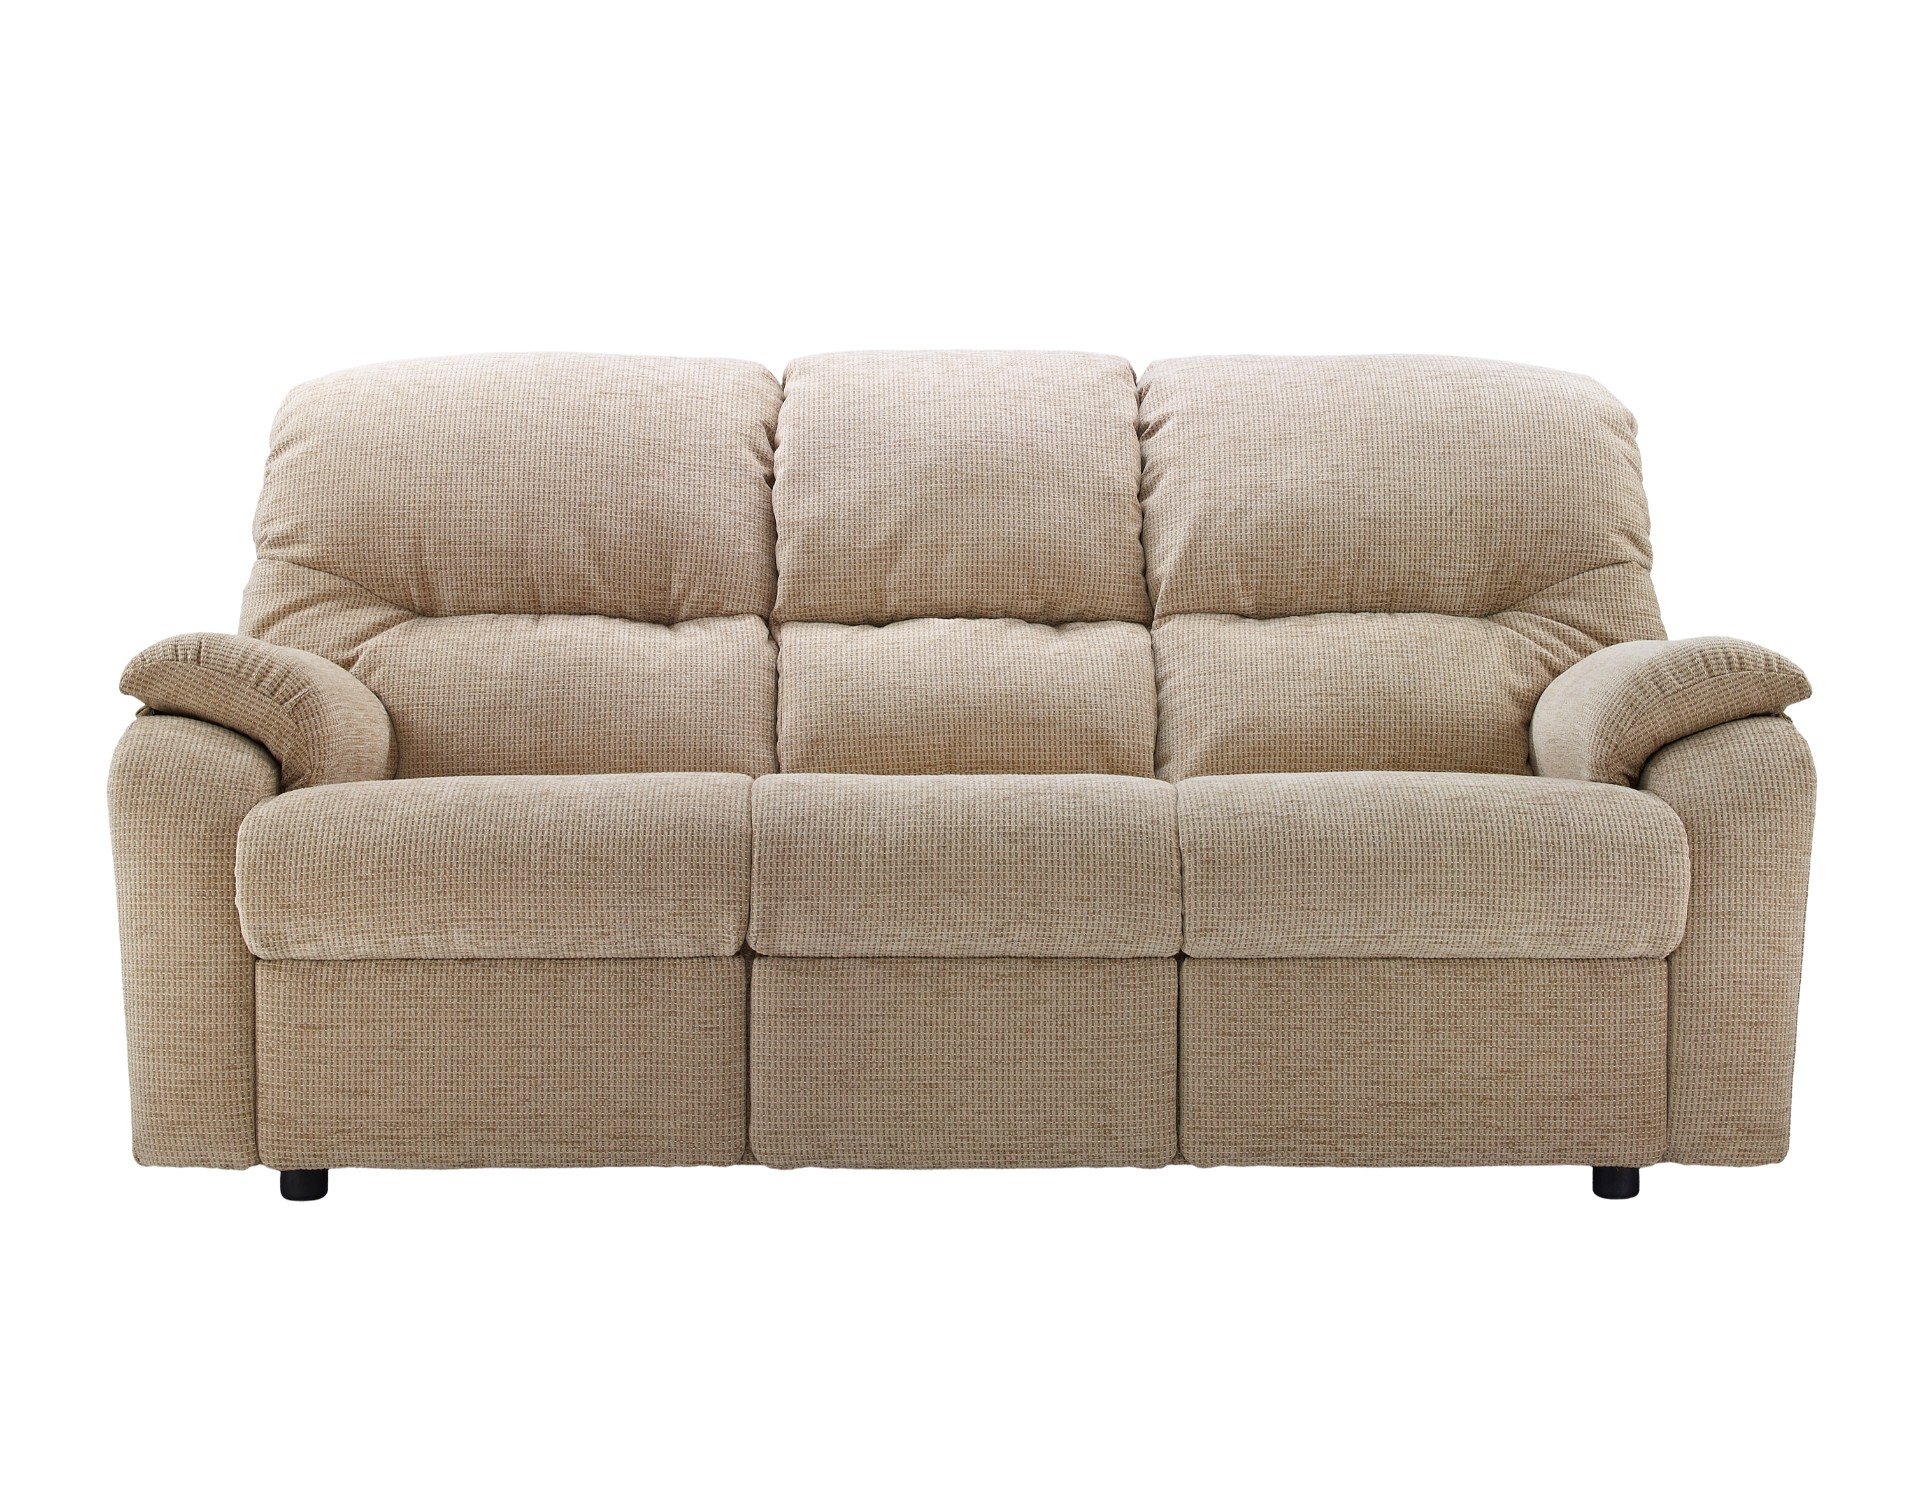 g plan mistral leather sofa reviews